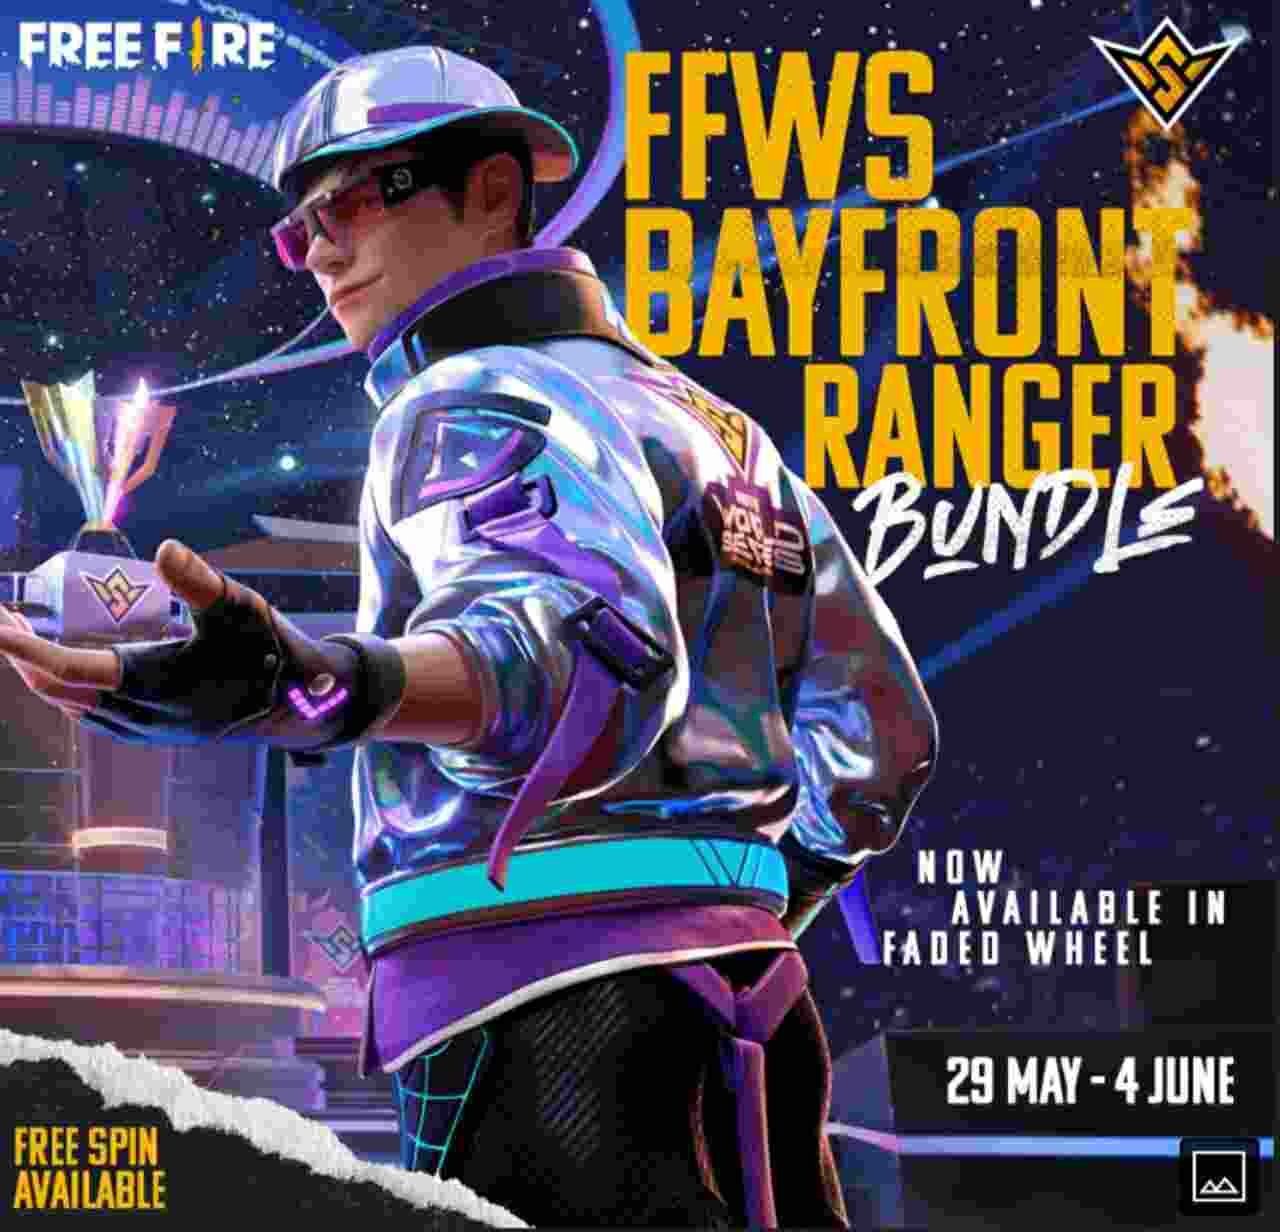 FFWS 2021 Bundle : Free Fire New Faded Wheel Event & Redeem Codes